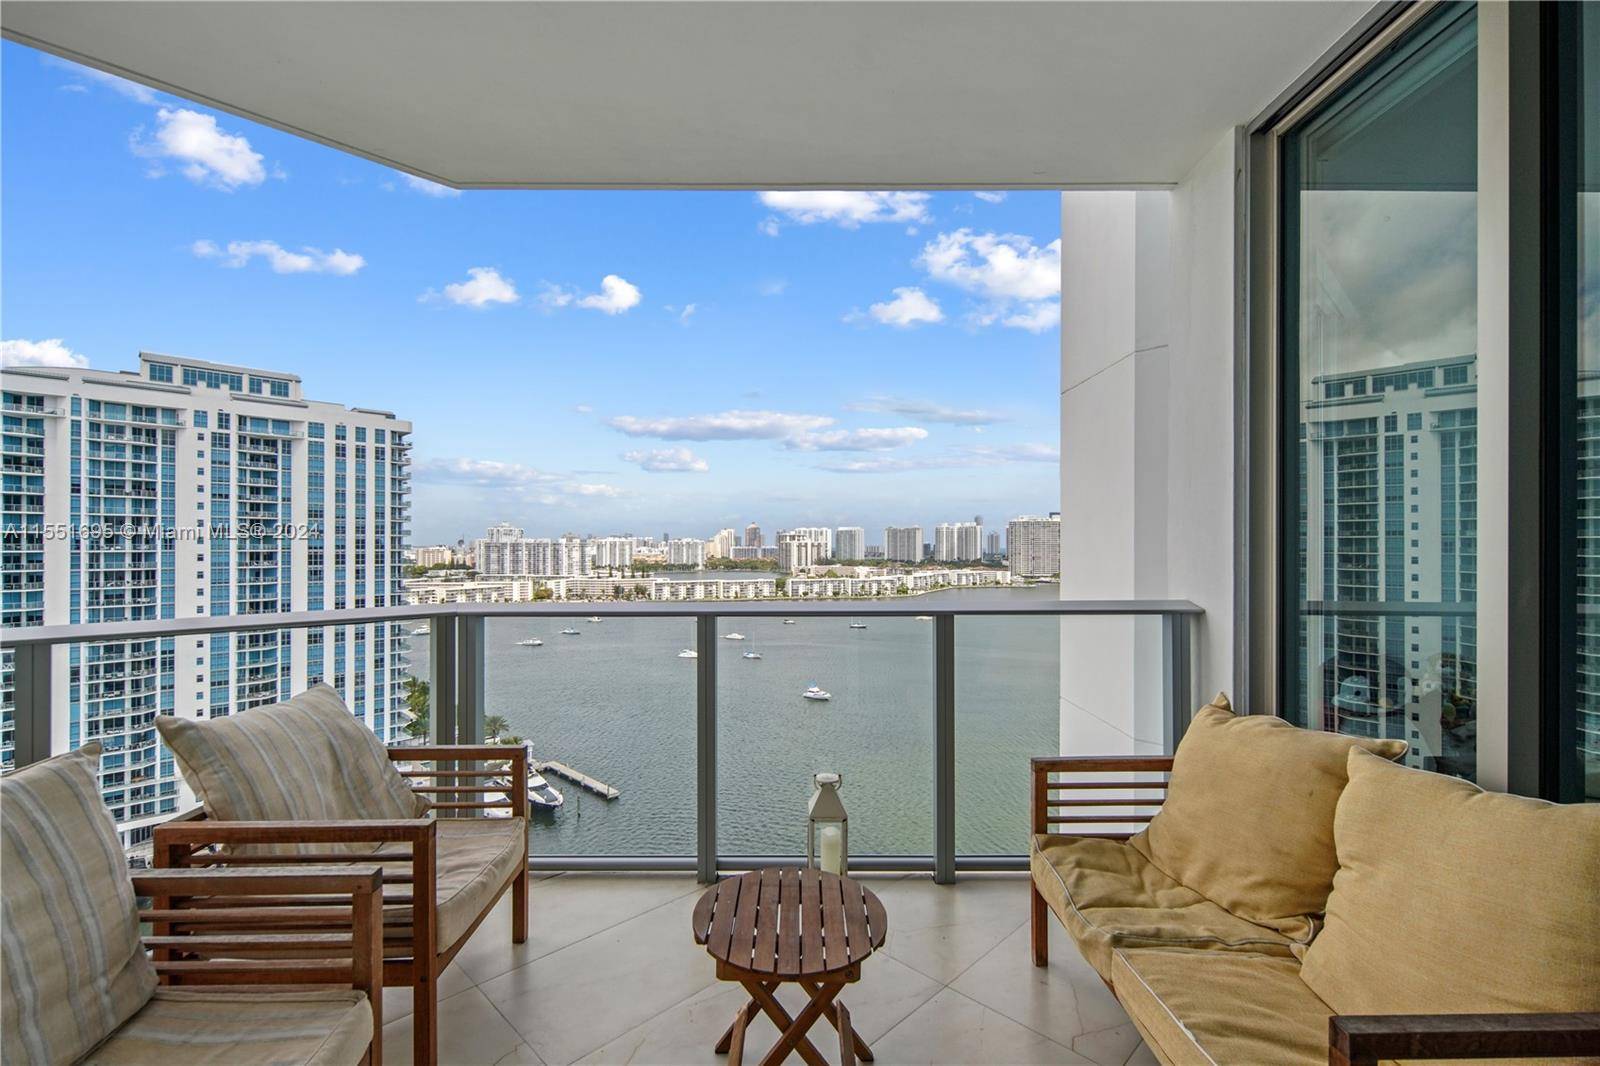 New to market, Reserve at Marina Palms residence 1805 boasting warm finishes with wood millwork, lightly used, 2 bedroom 2.